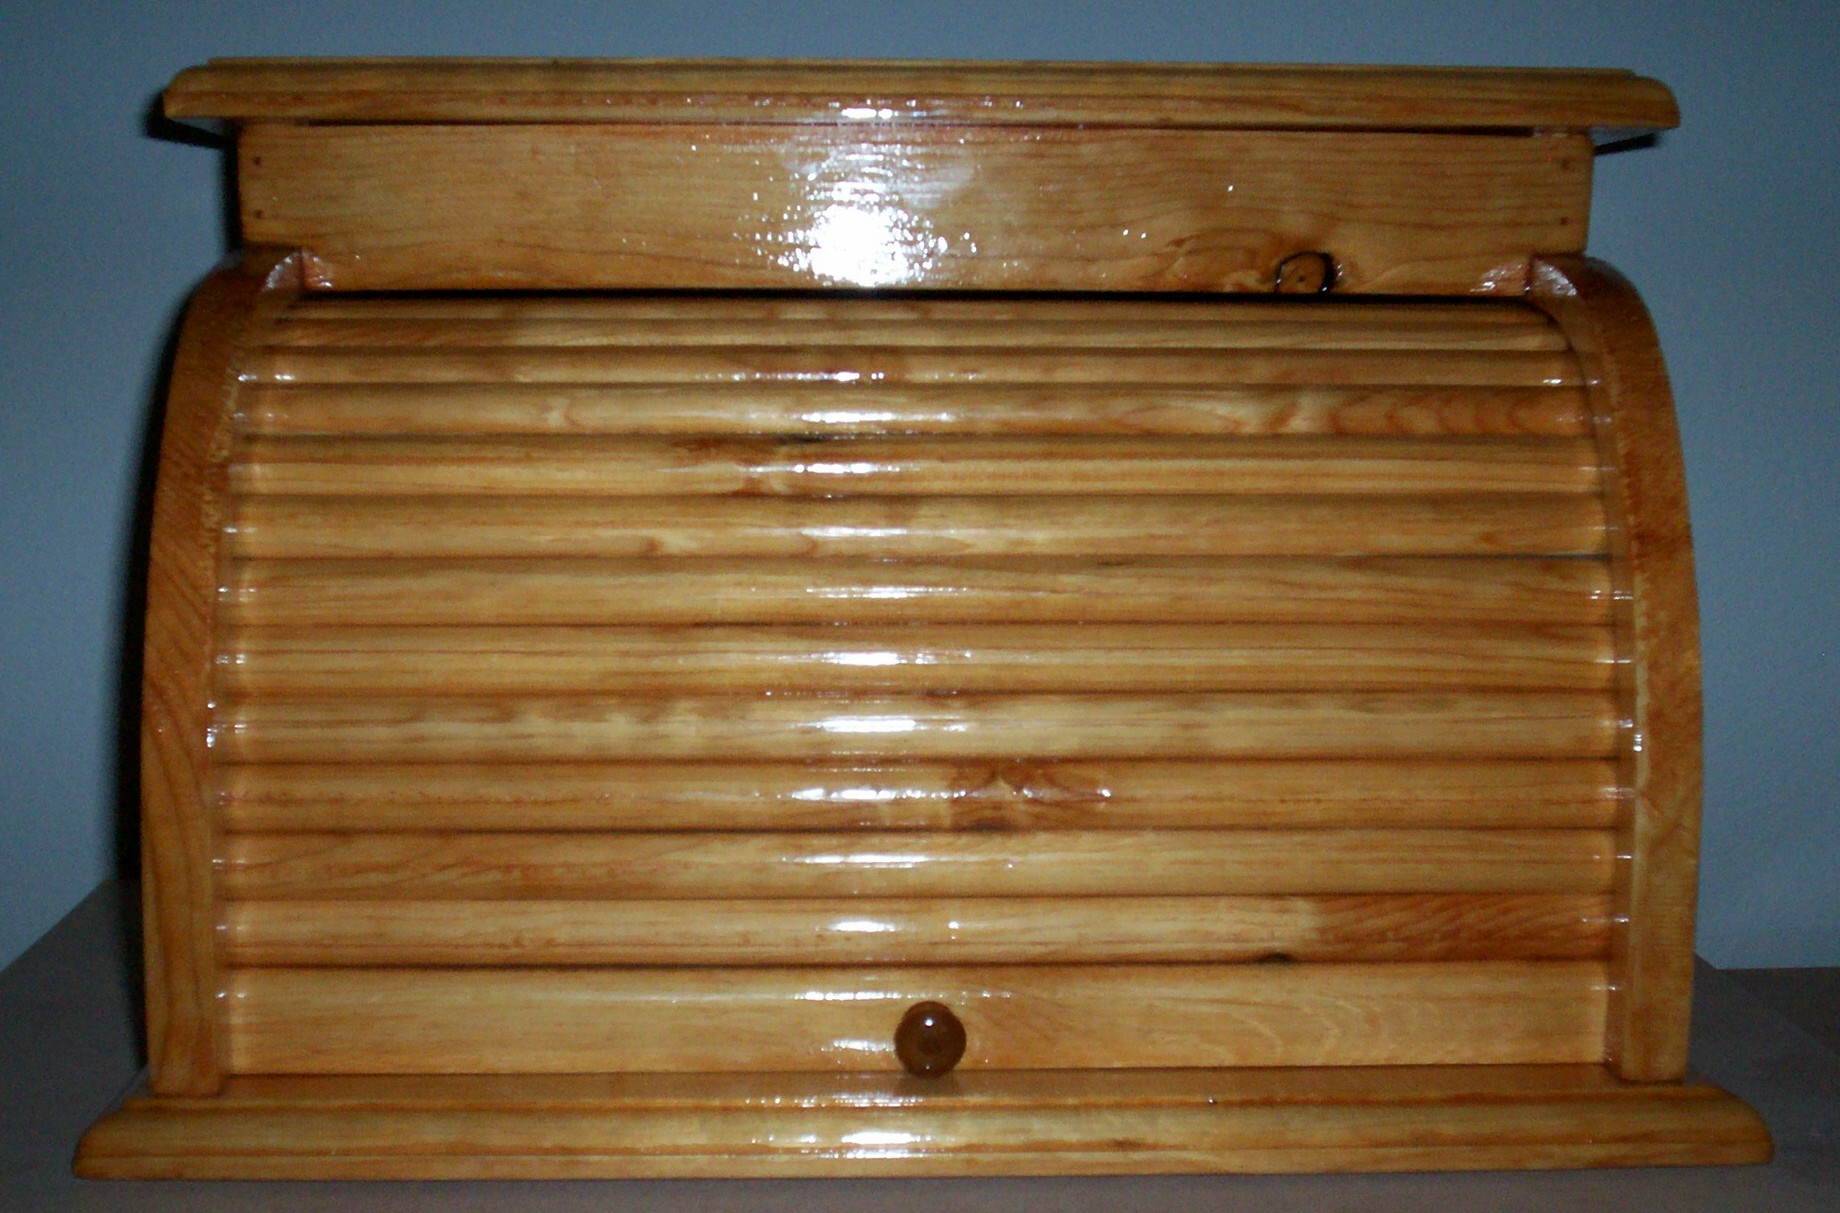 Bread box with roll up door. Different colored stains available